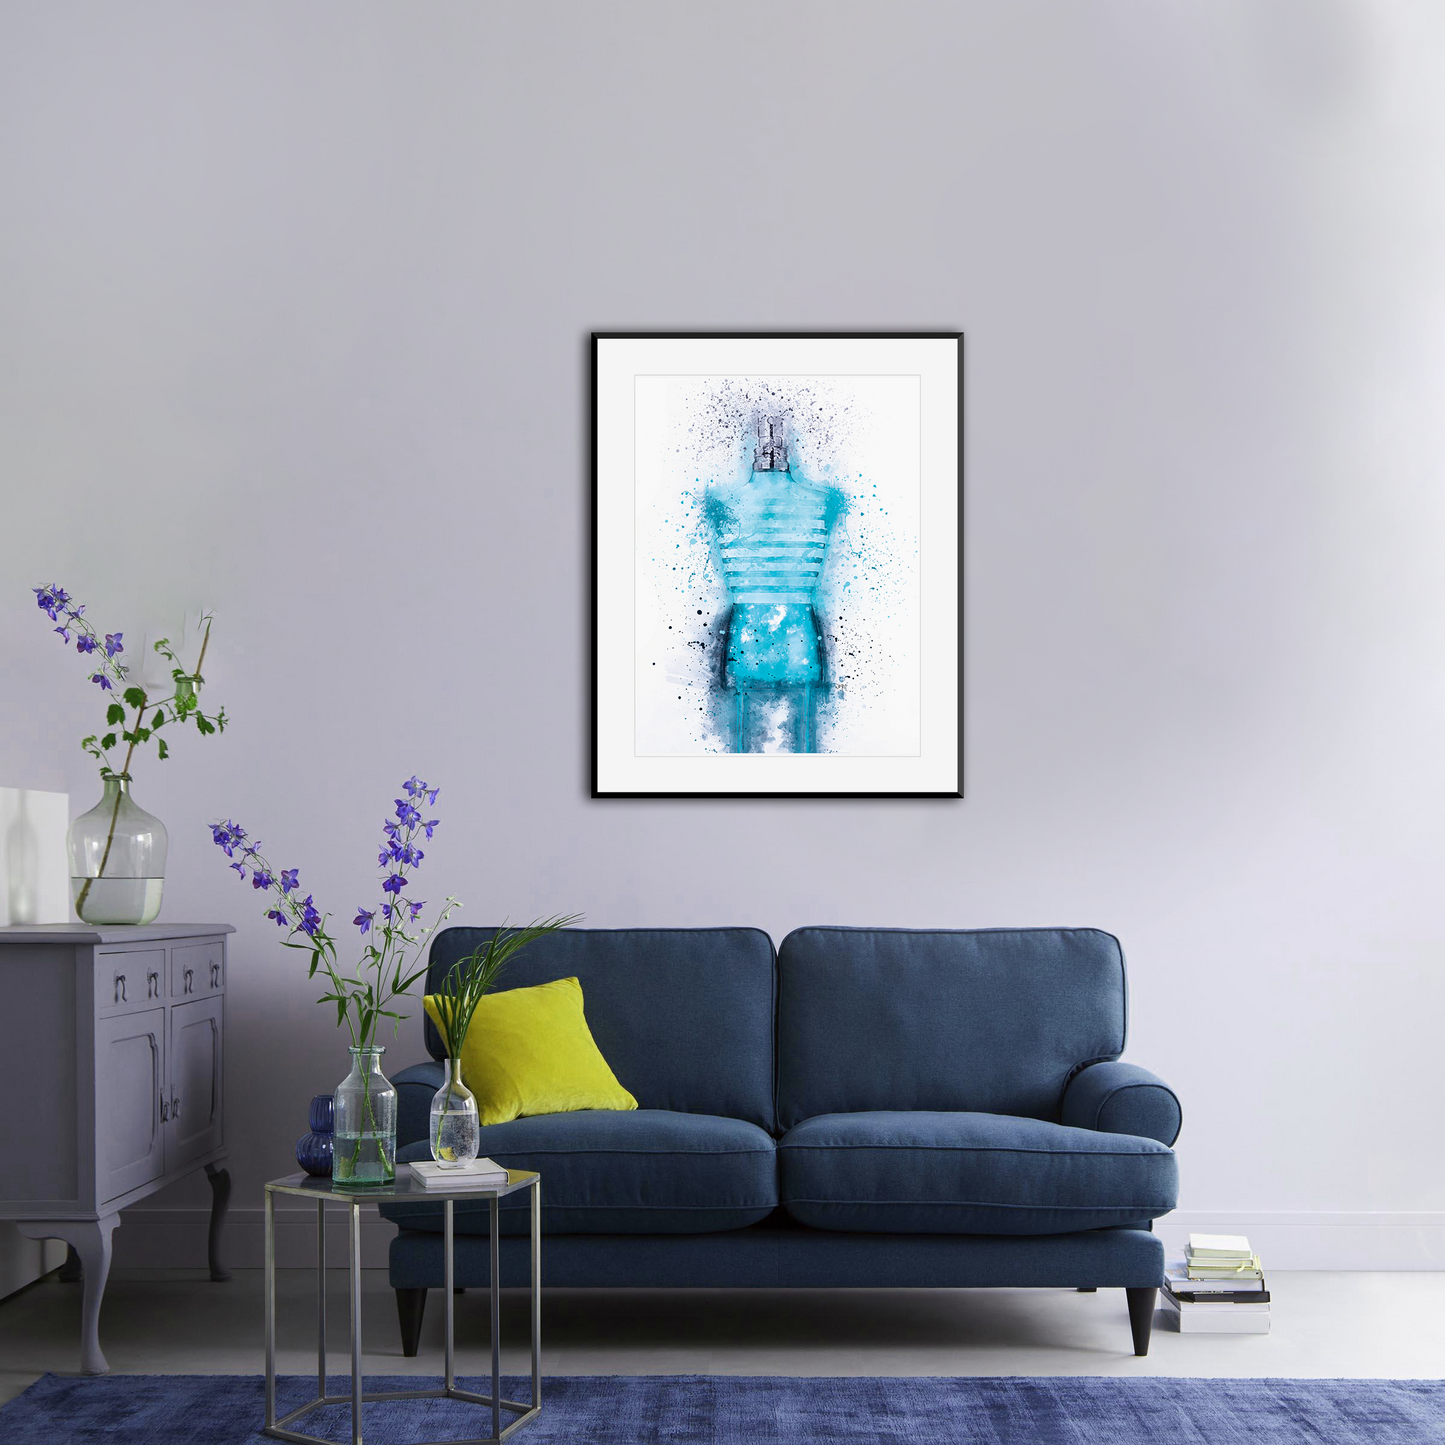 Le Male Aftershave Bottle Wall Art Print- available in different sizes